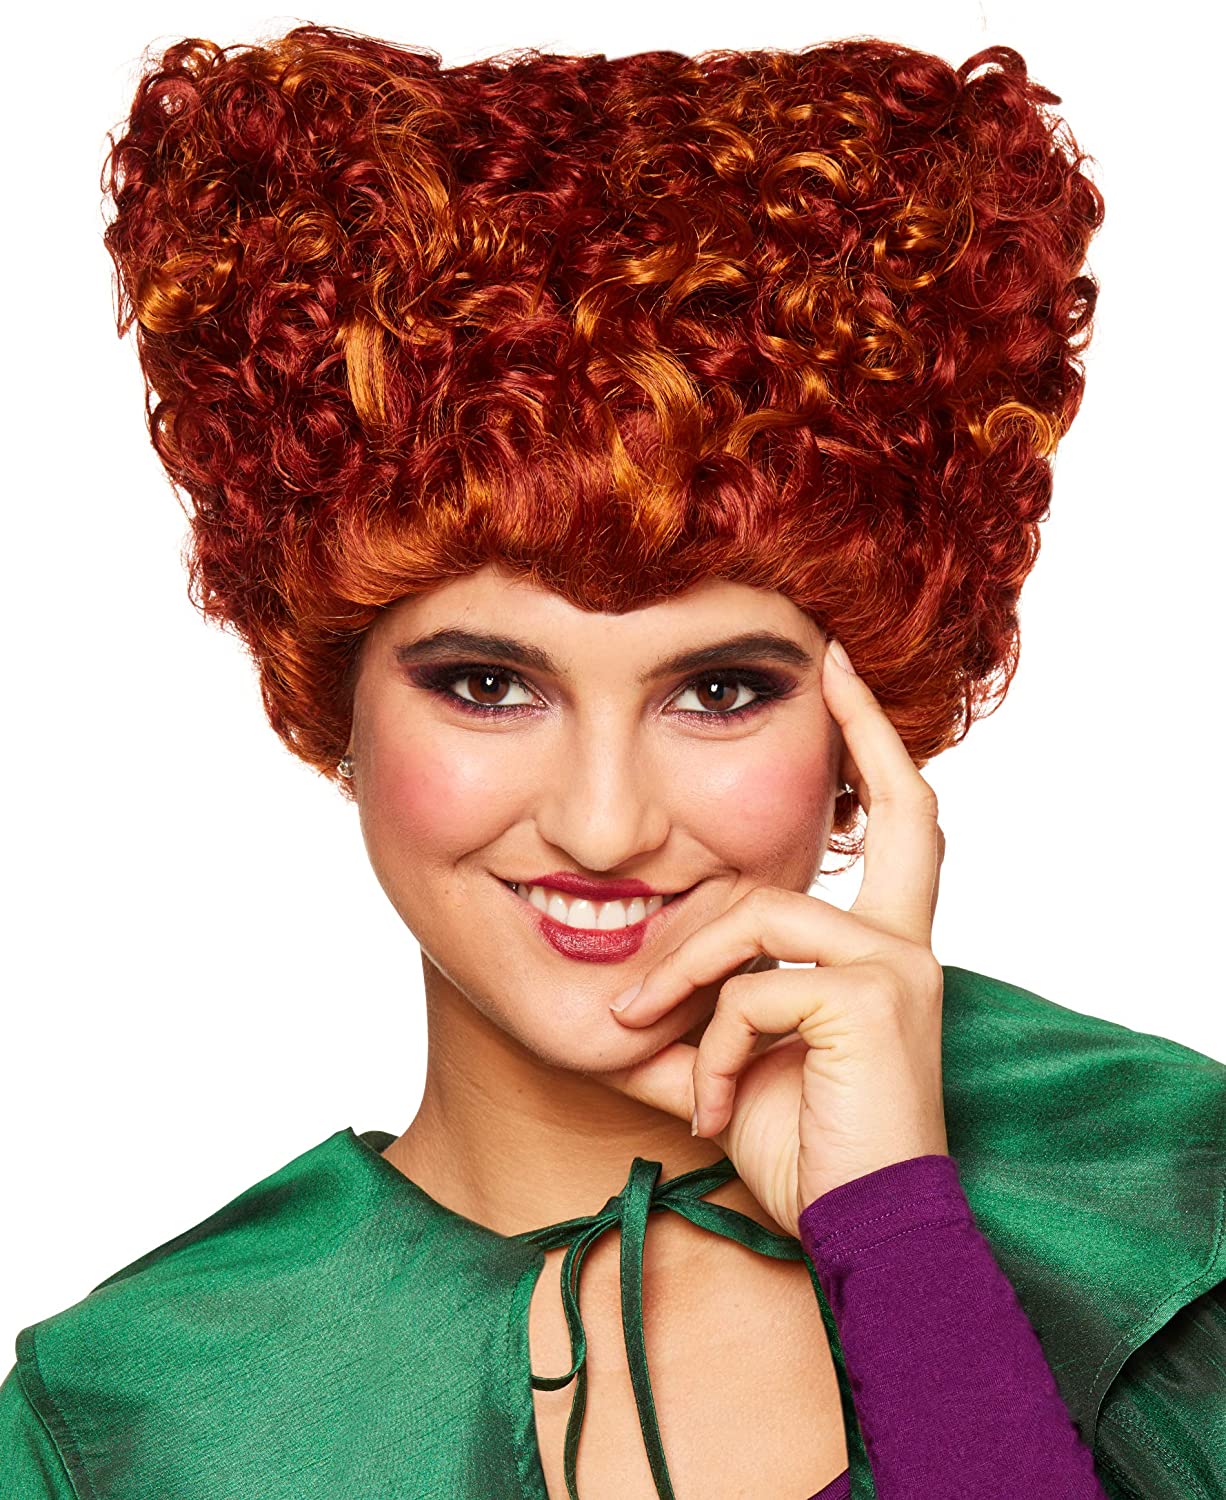 Price:$19.99    Spirit Halloween Hocus Pocus Winifred Sanderson Wig for Adults - Deluxe | Officially Licensed  Clothing